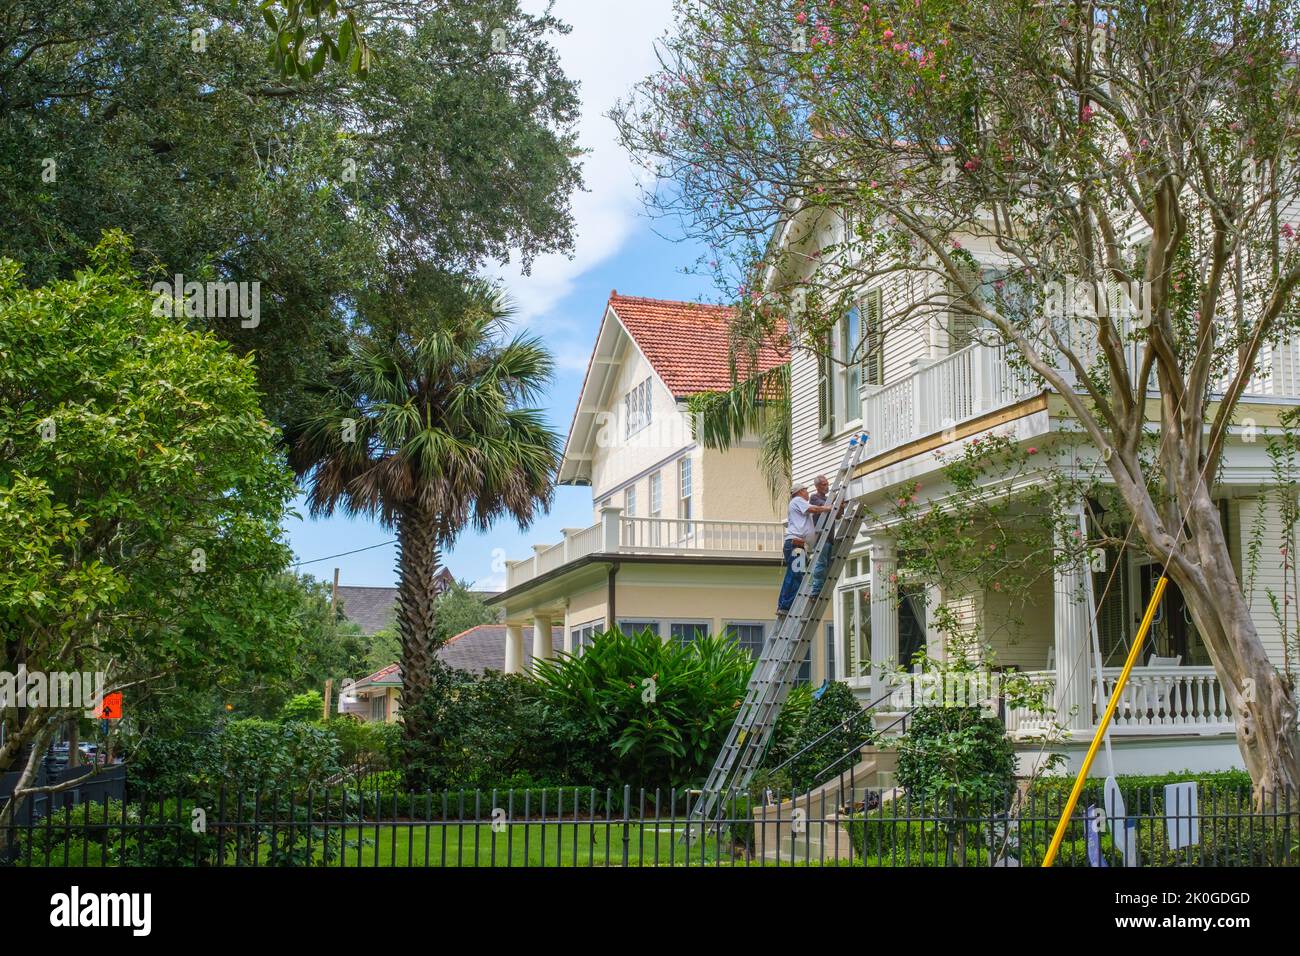 NEW ORLEANS, LA, USA  - SEPTEMBER 7, 2022: Two workers on ladders repairing an historic house on St. Charles Avenue in Uptown neighborhood Stock Photo